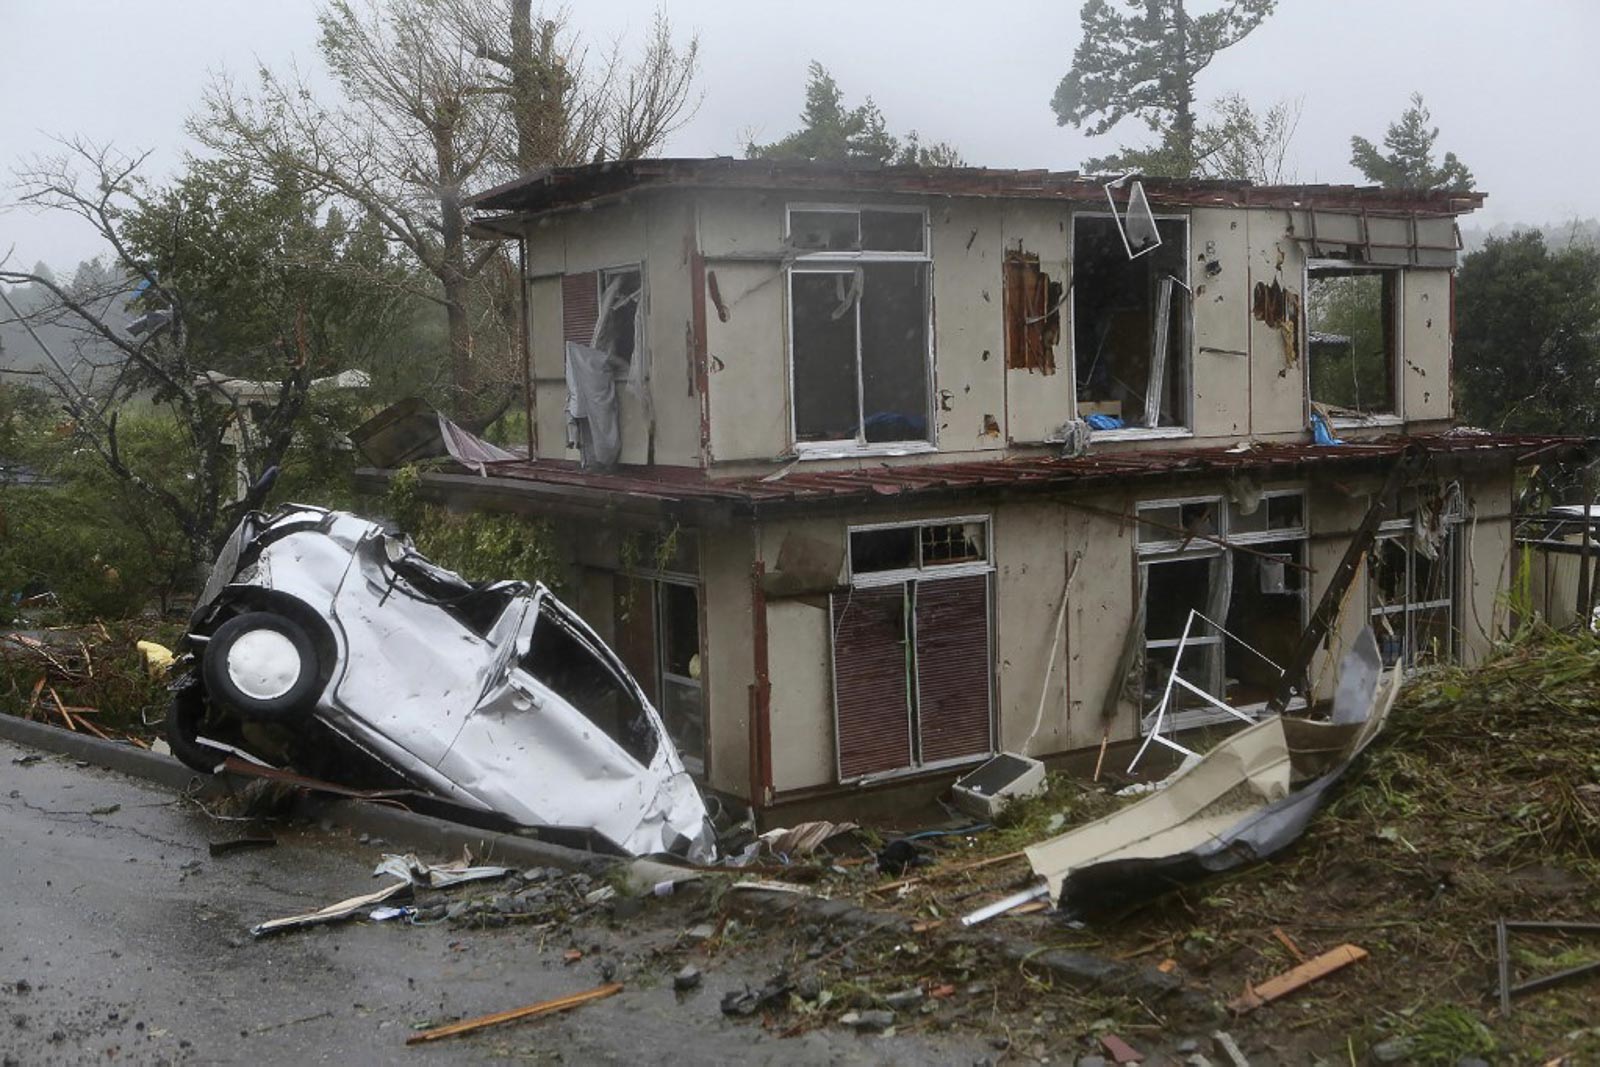 TYPHOON HAGIBIS. A damaged vehicle sits in a ditch next to a badly damaged house after strong winds brought by Typhoon Hagibis hit the area in Ichihara, Chiba prefecture on October 12, 2019. Photo by Jiji Press/AFP 